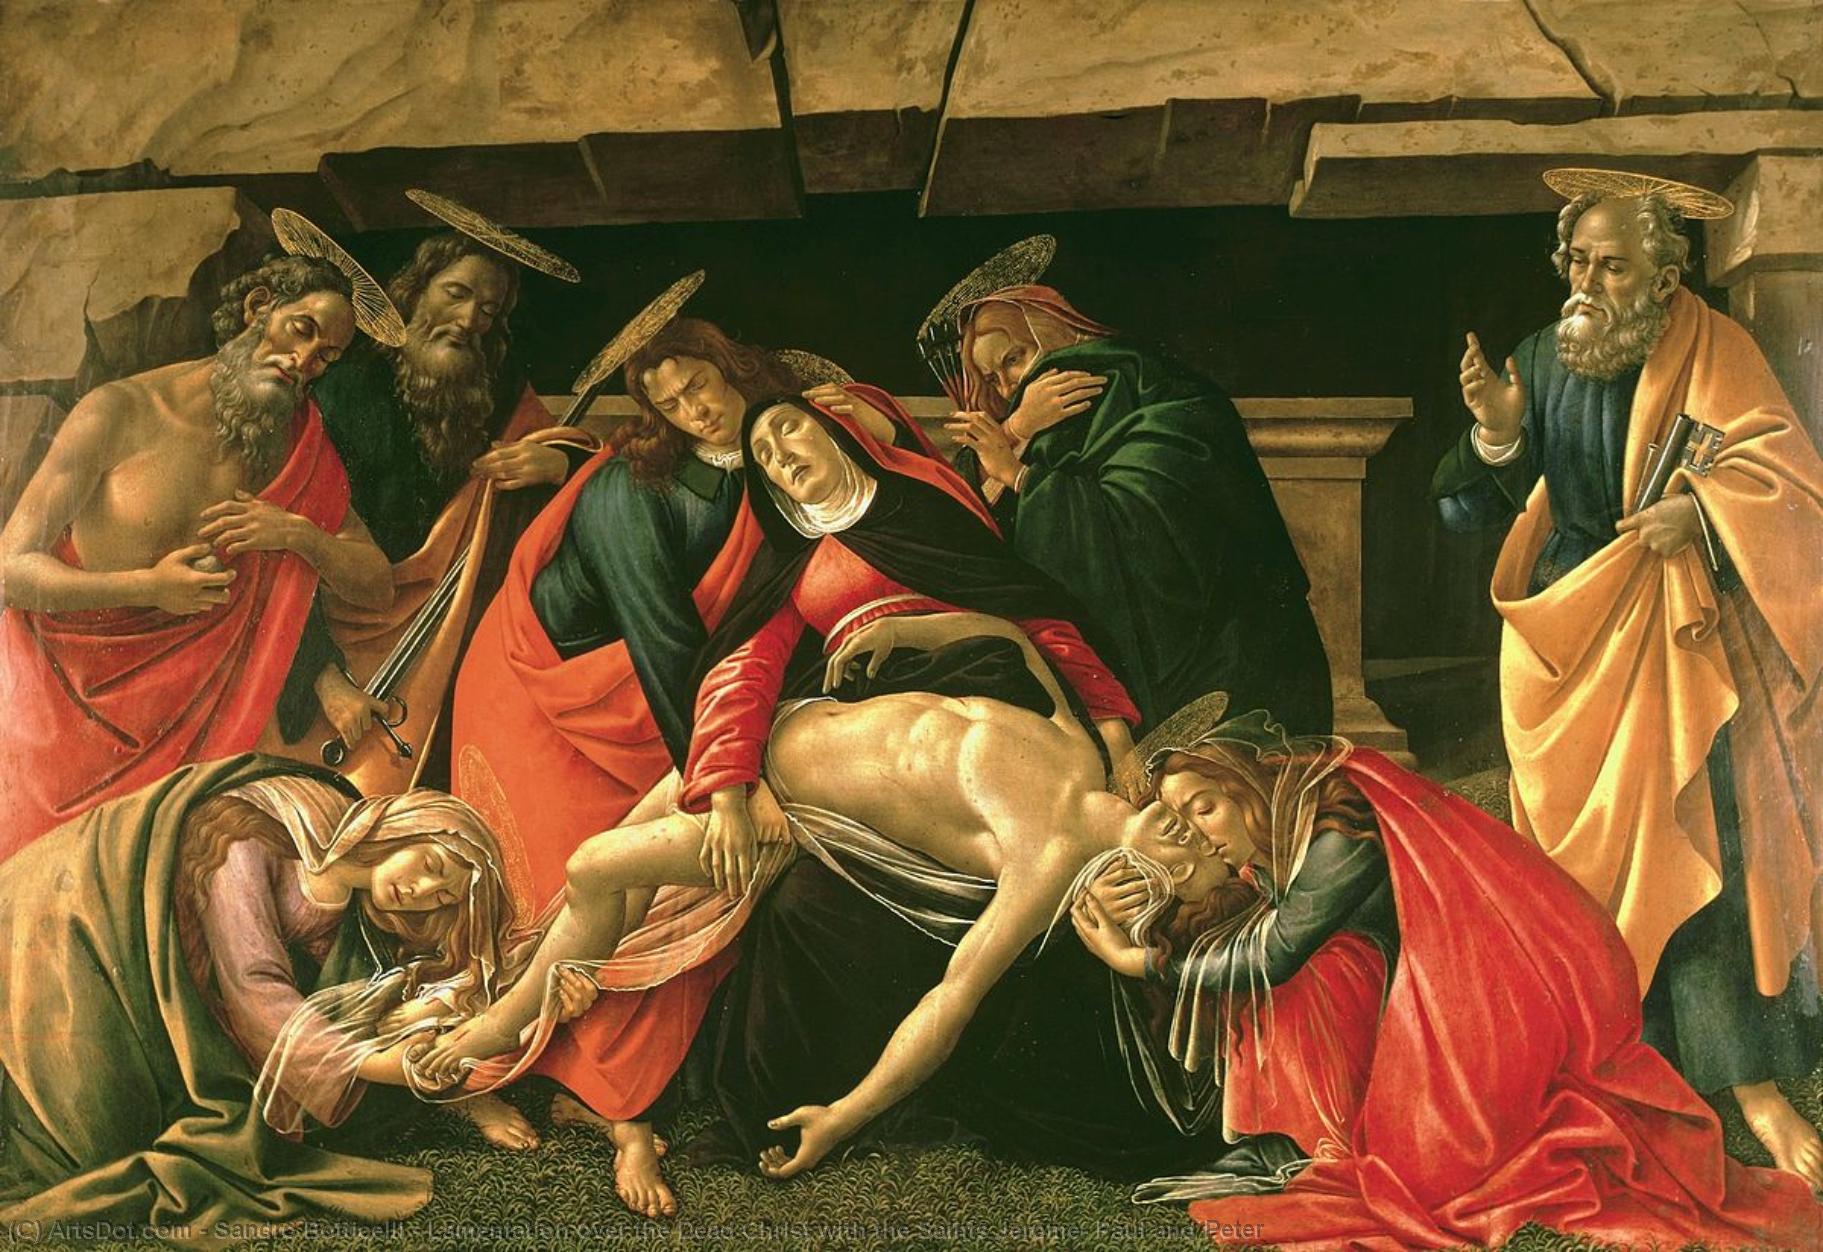 WikiOO.org - 백과 사전 - 회화, 삽화 Sandro Botticelli - Lamentation over the Dead Christ with the Saints Jerome, Paul and Peter